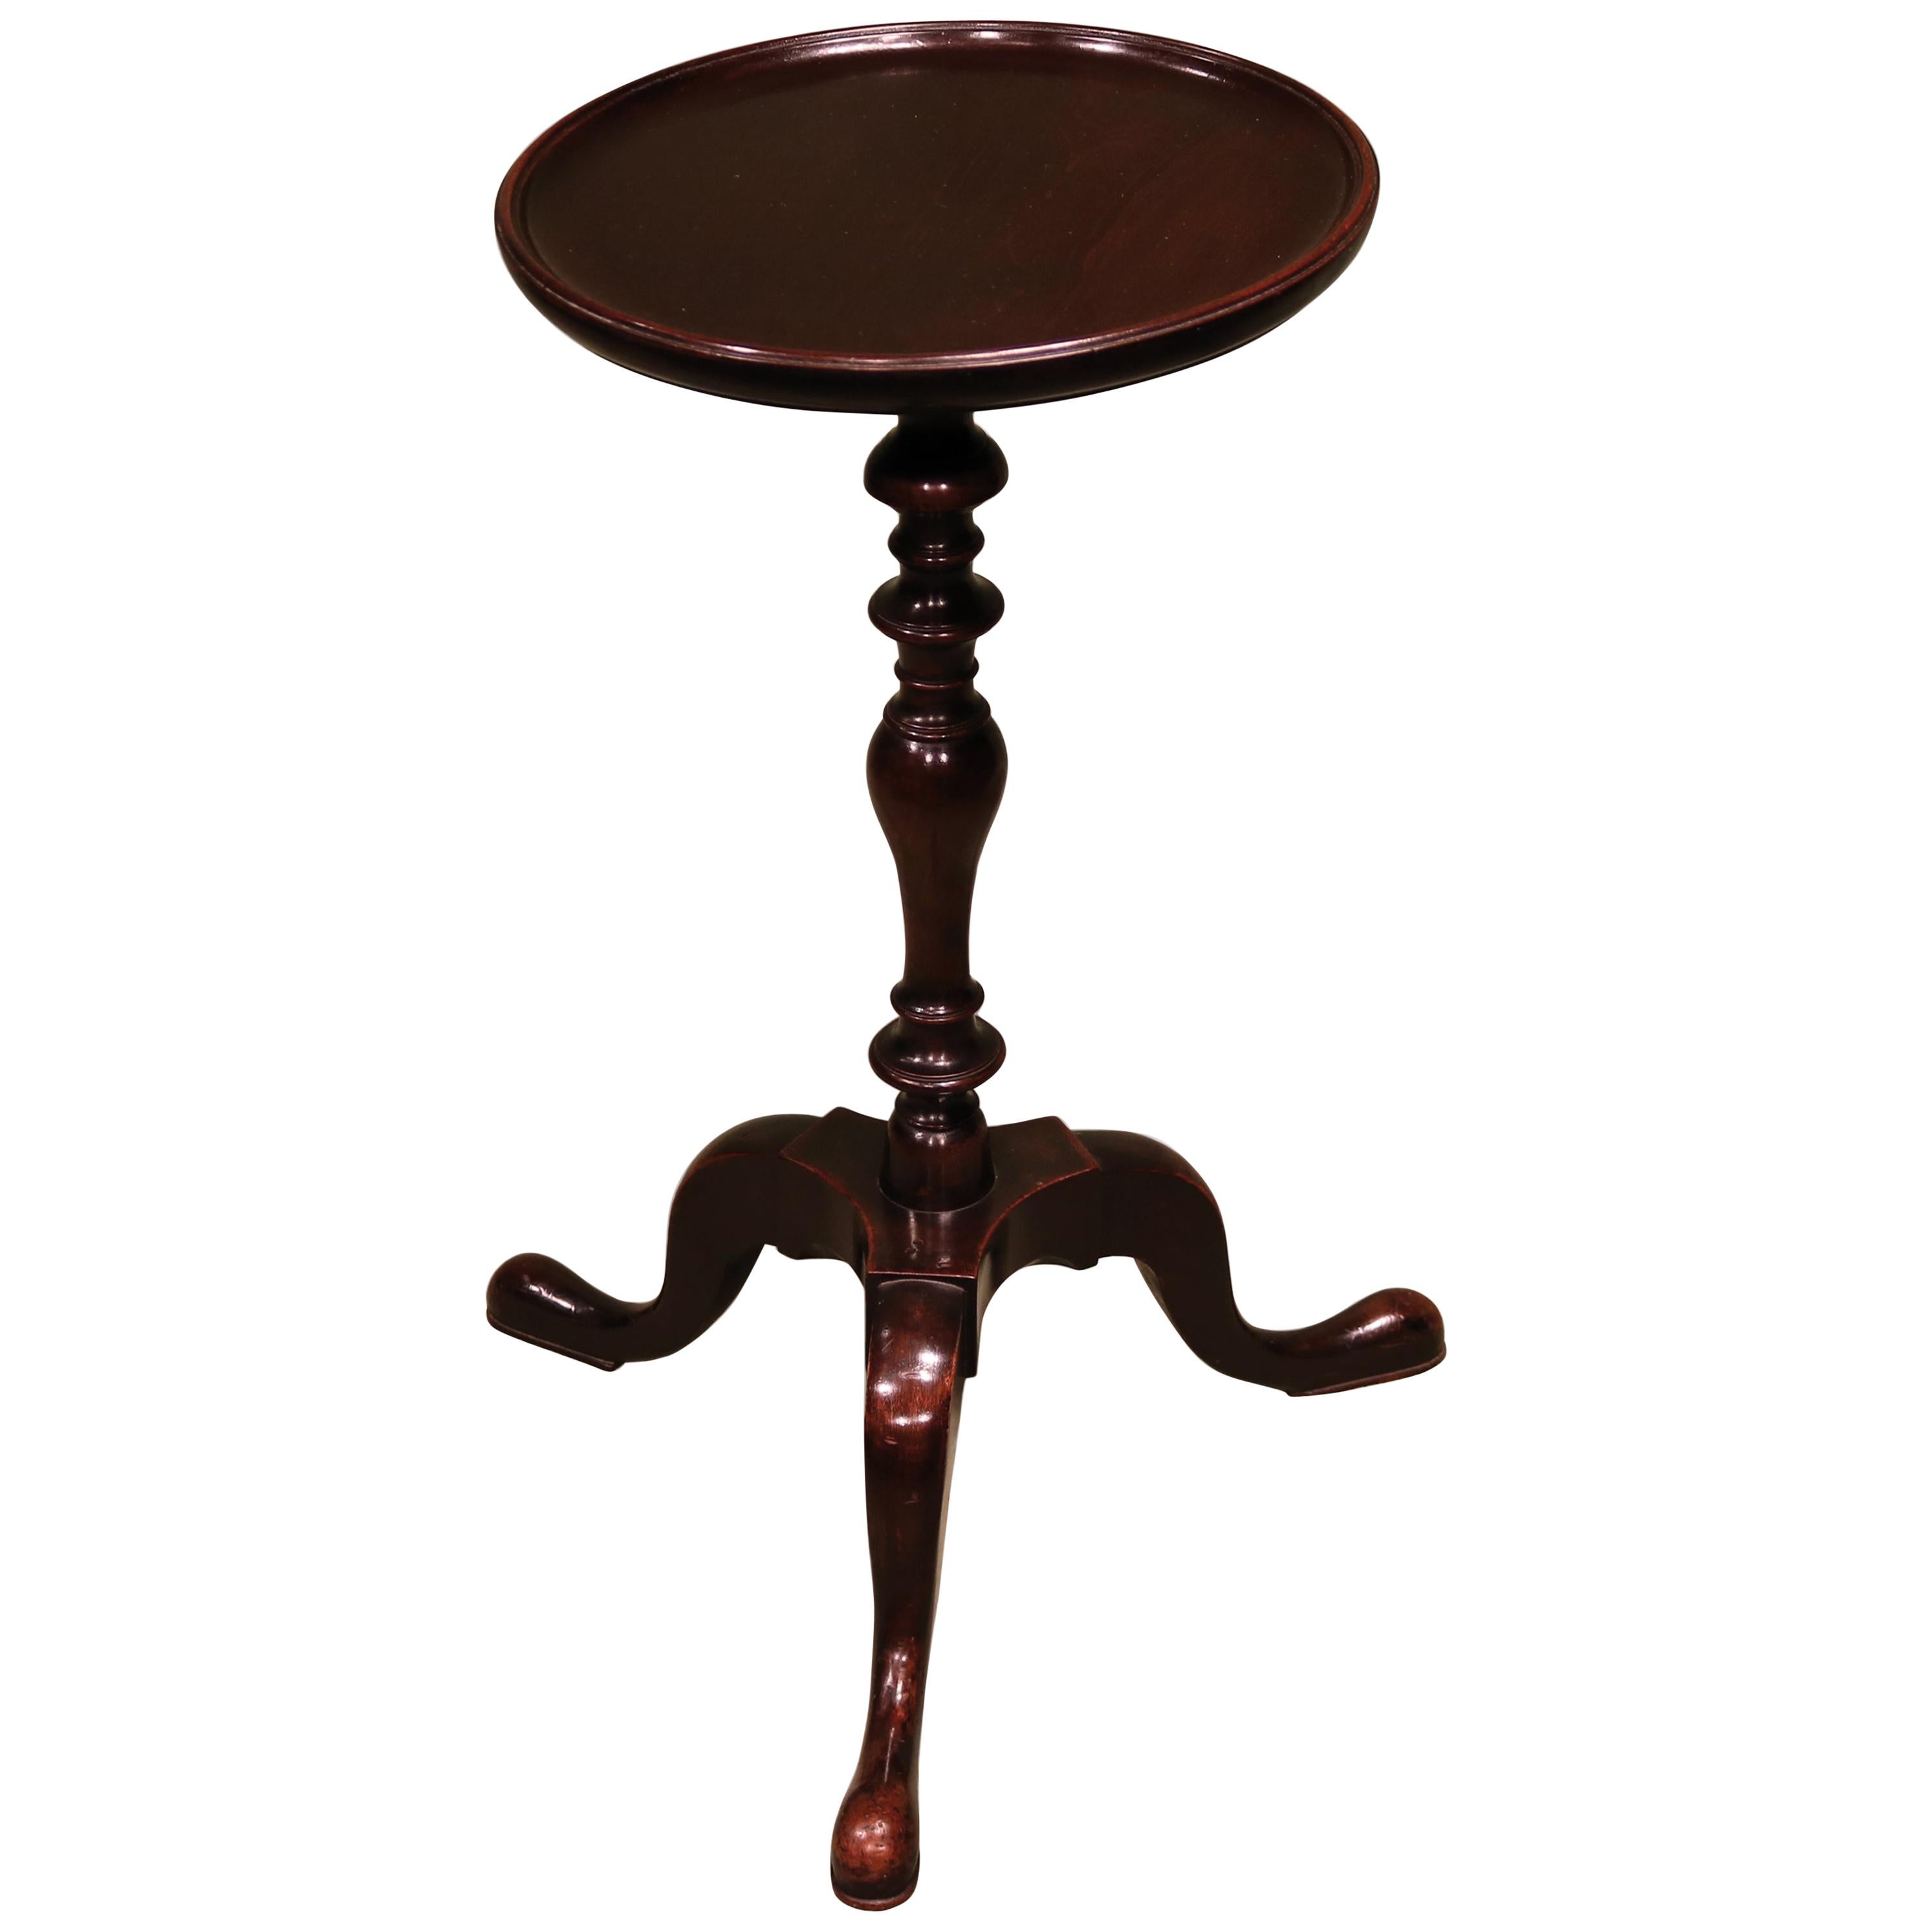 Mid-18th Century Mahogany Kettle Stand or Tripod Table